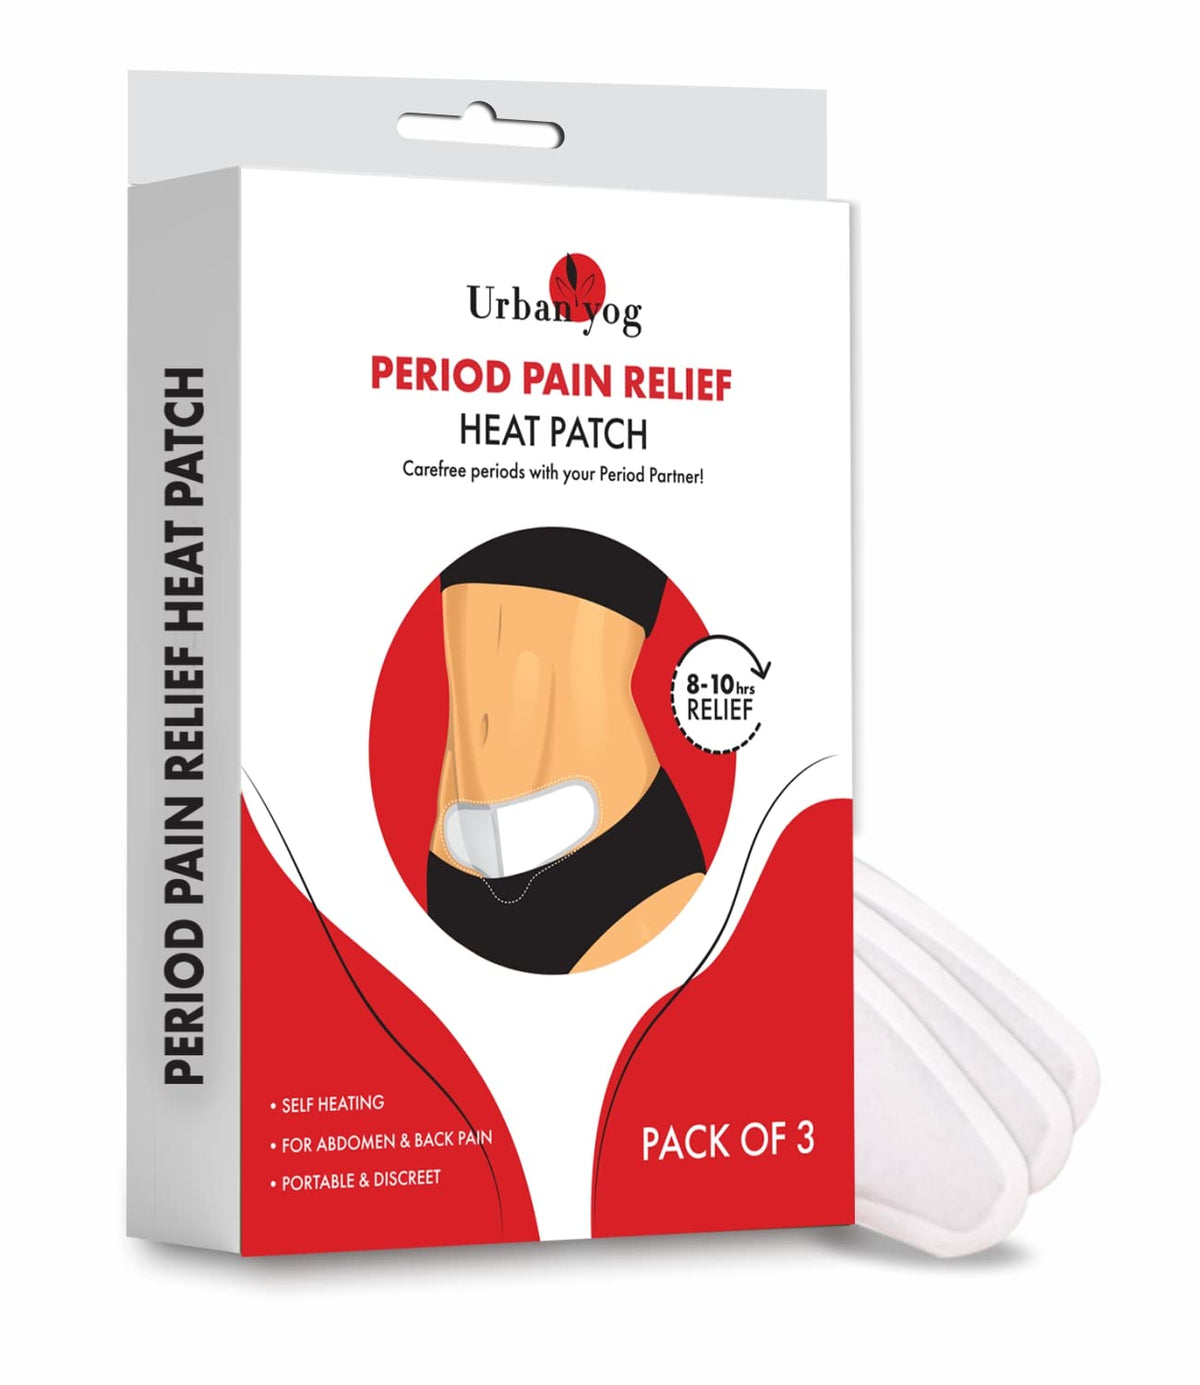 Urban yog Period Pain Relief Heat Patches (Pack of 3) | lasts for 10 hrs | sticks on skin | 100% Natural | Relief from menstrual & back pain